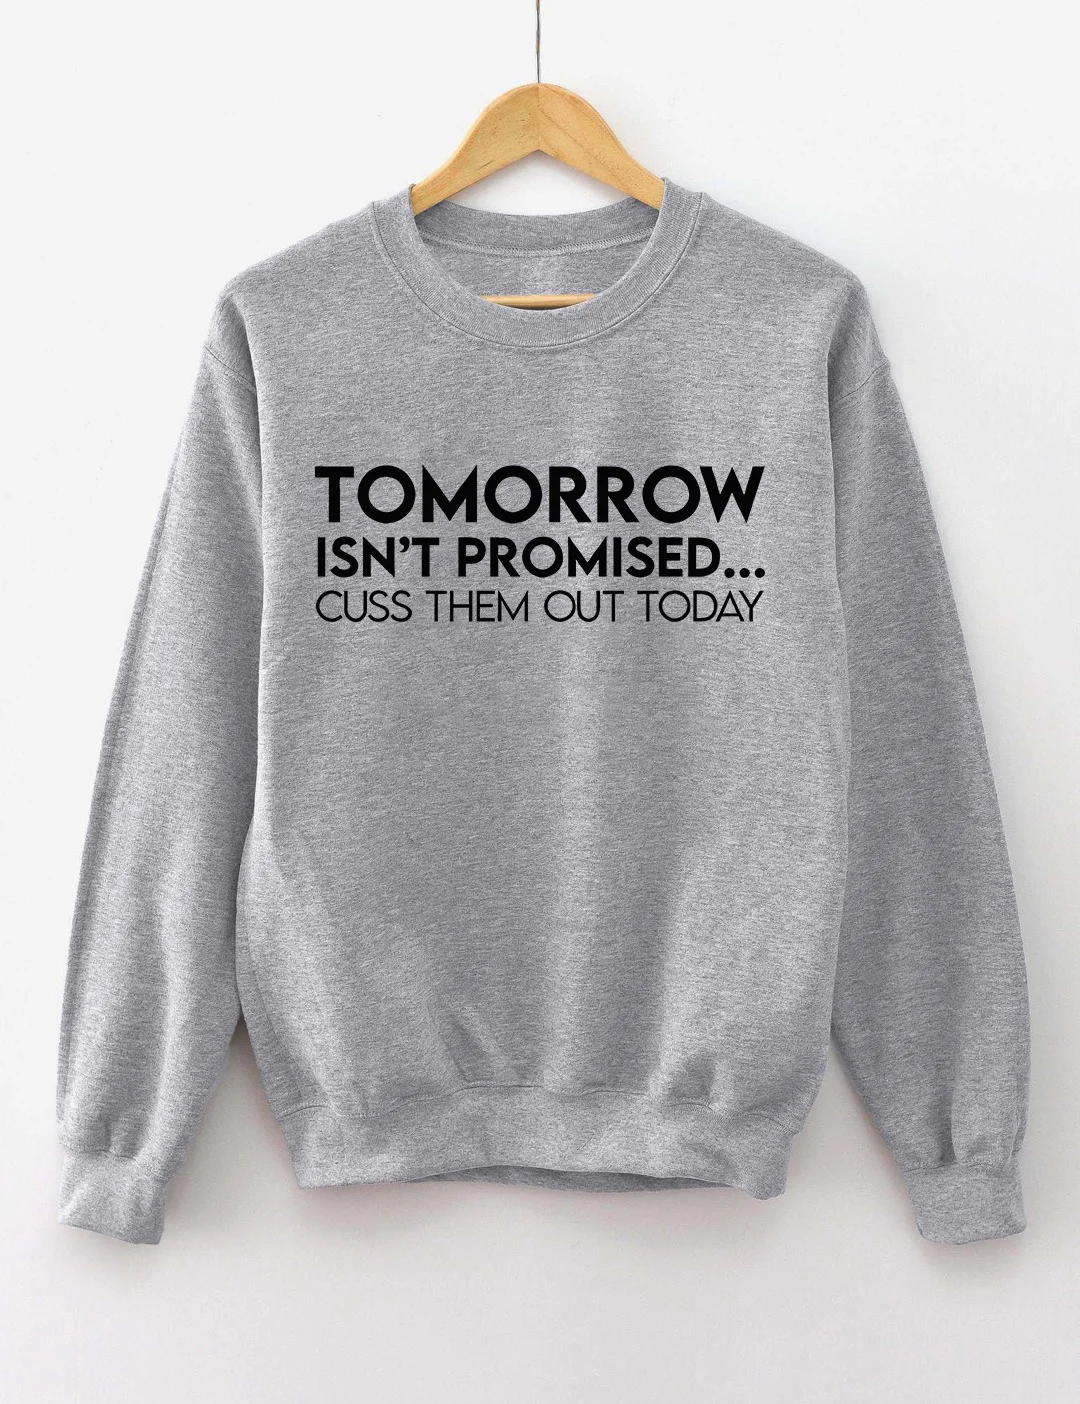 Tomorrow Isnt Promised Cuss Them Out Today Sweatshirt